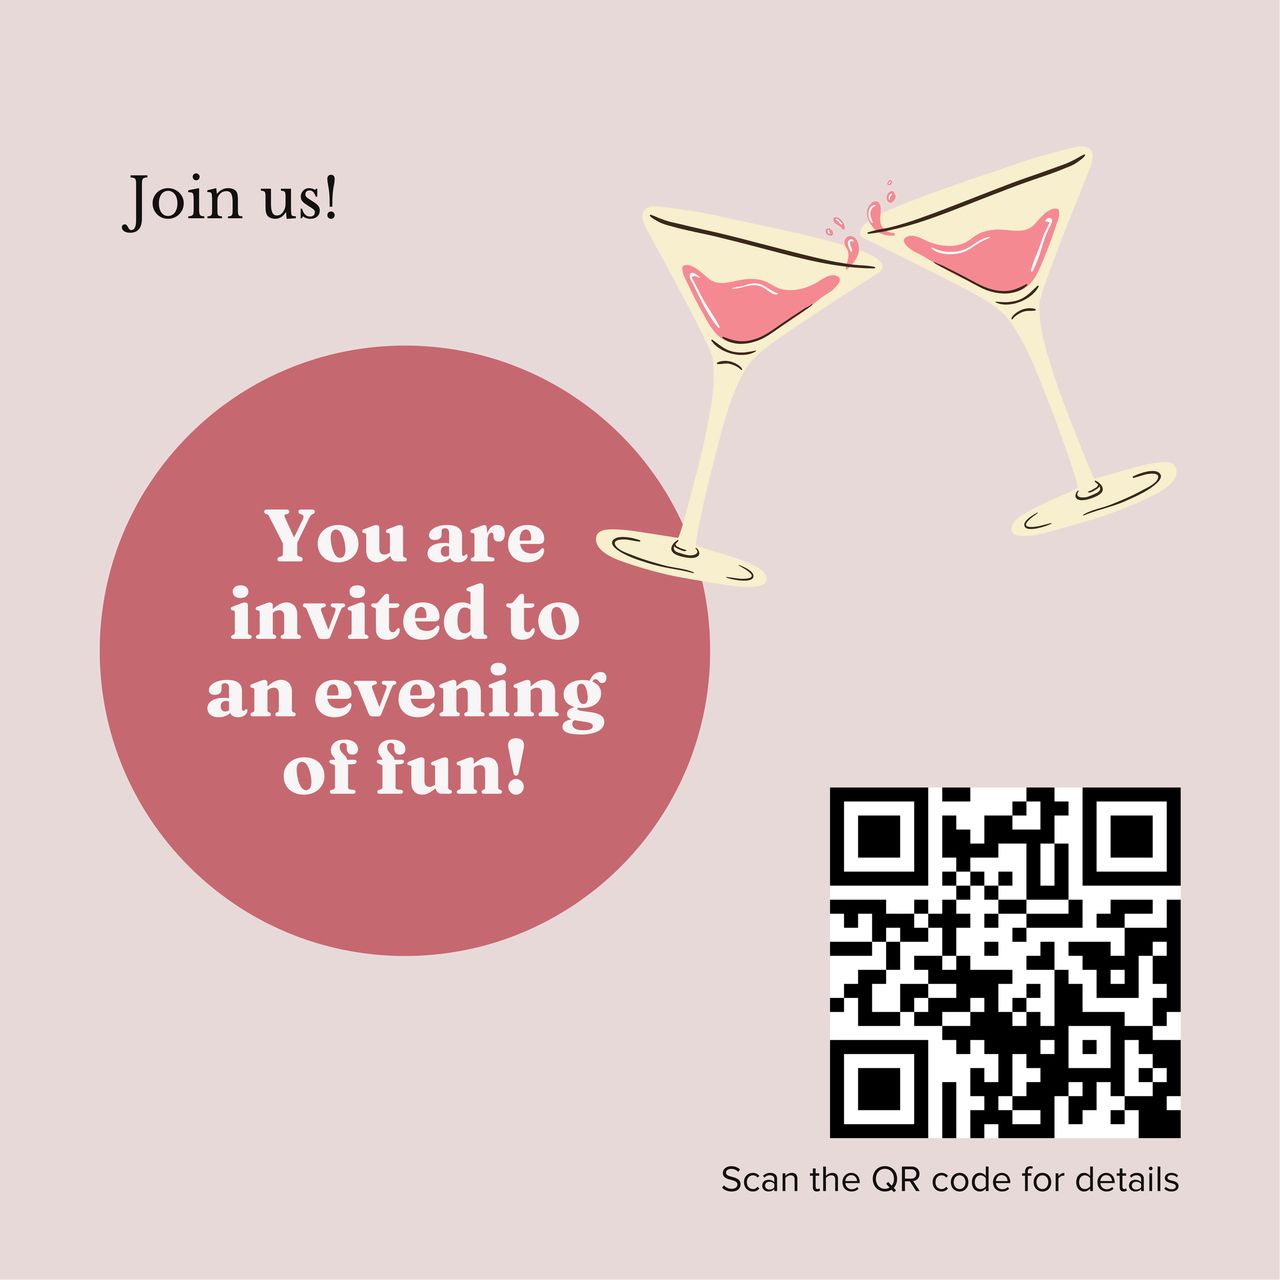 invitation template that says "join us" with a QR code